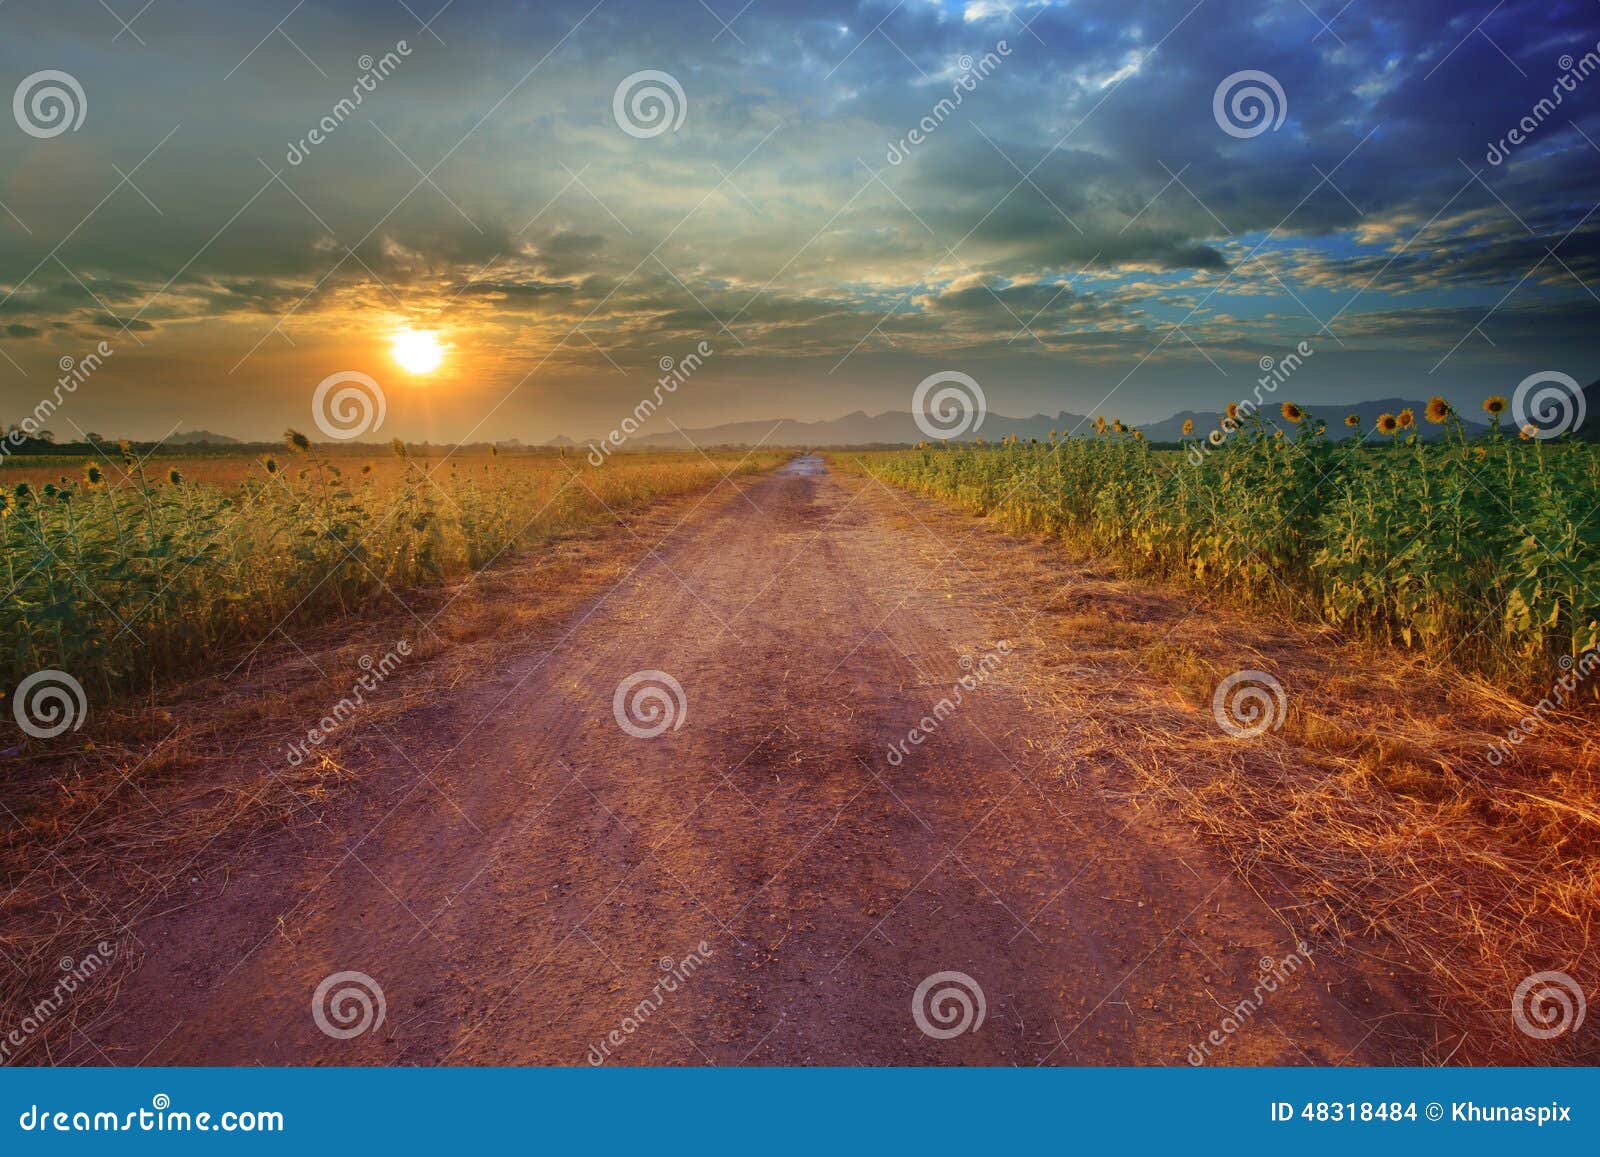 landscape of rural road perspective to sunflower farm field with